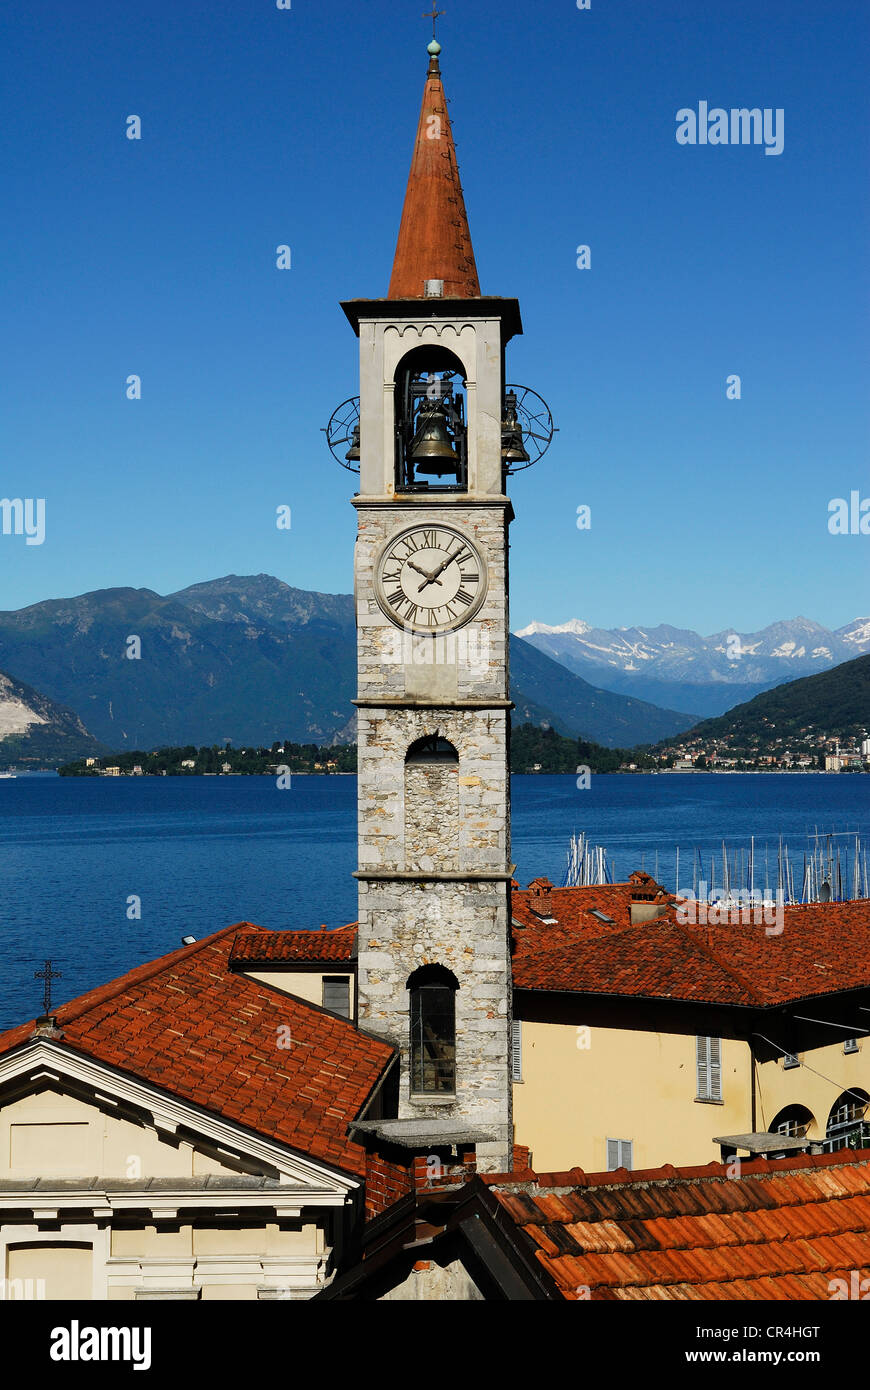 Italy, Lombardy, Lake Maggiore, Laveno Mombello, downtown and the bell tower of St Philip and James Church Stock Photo